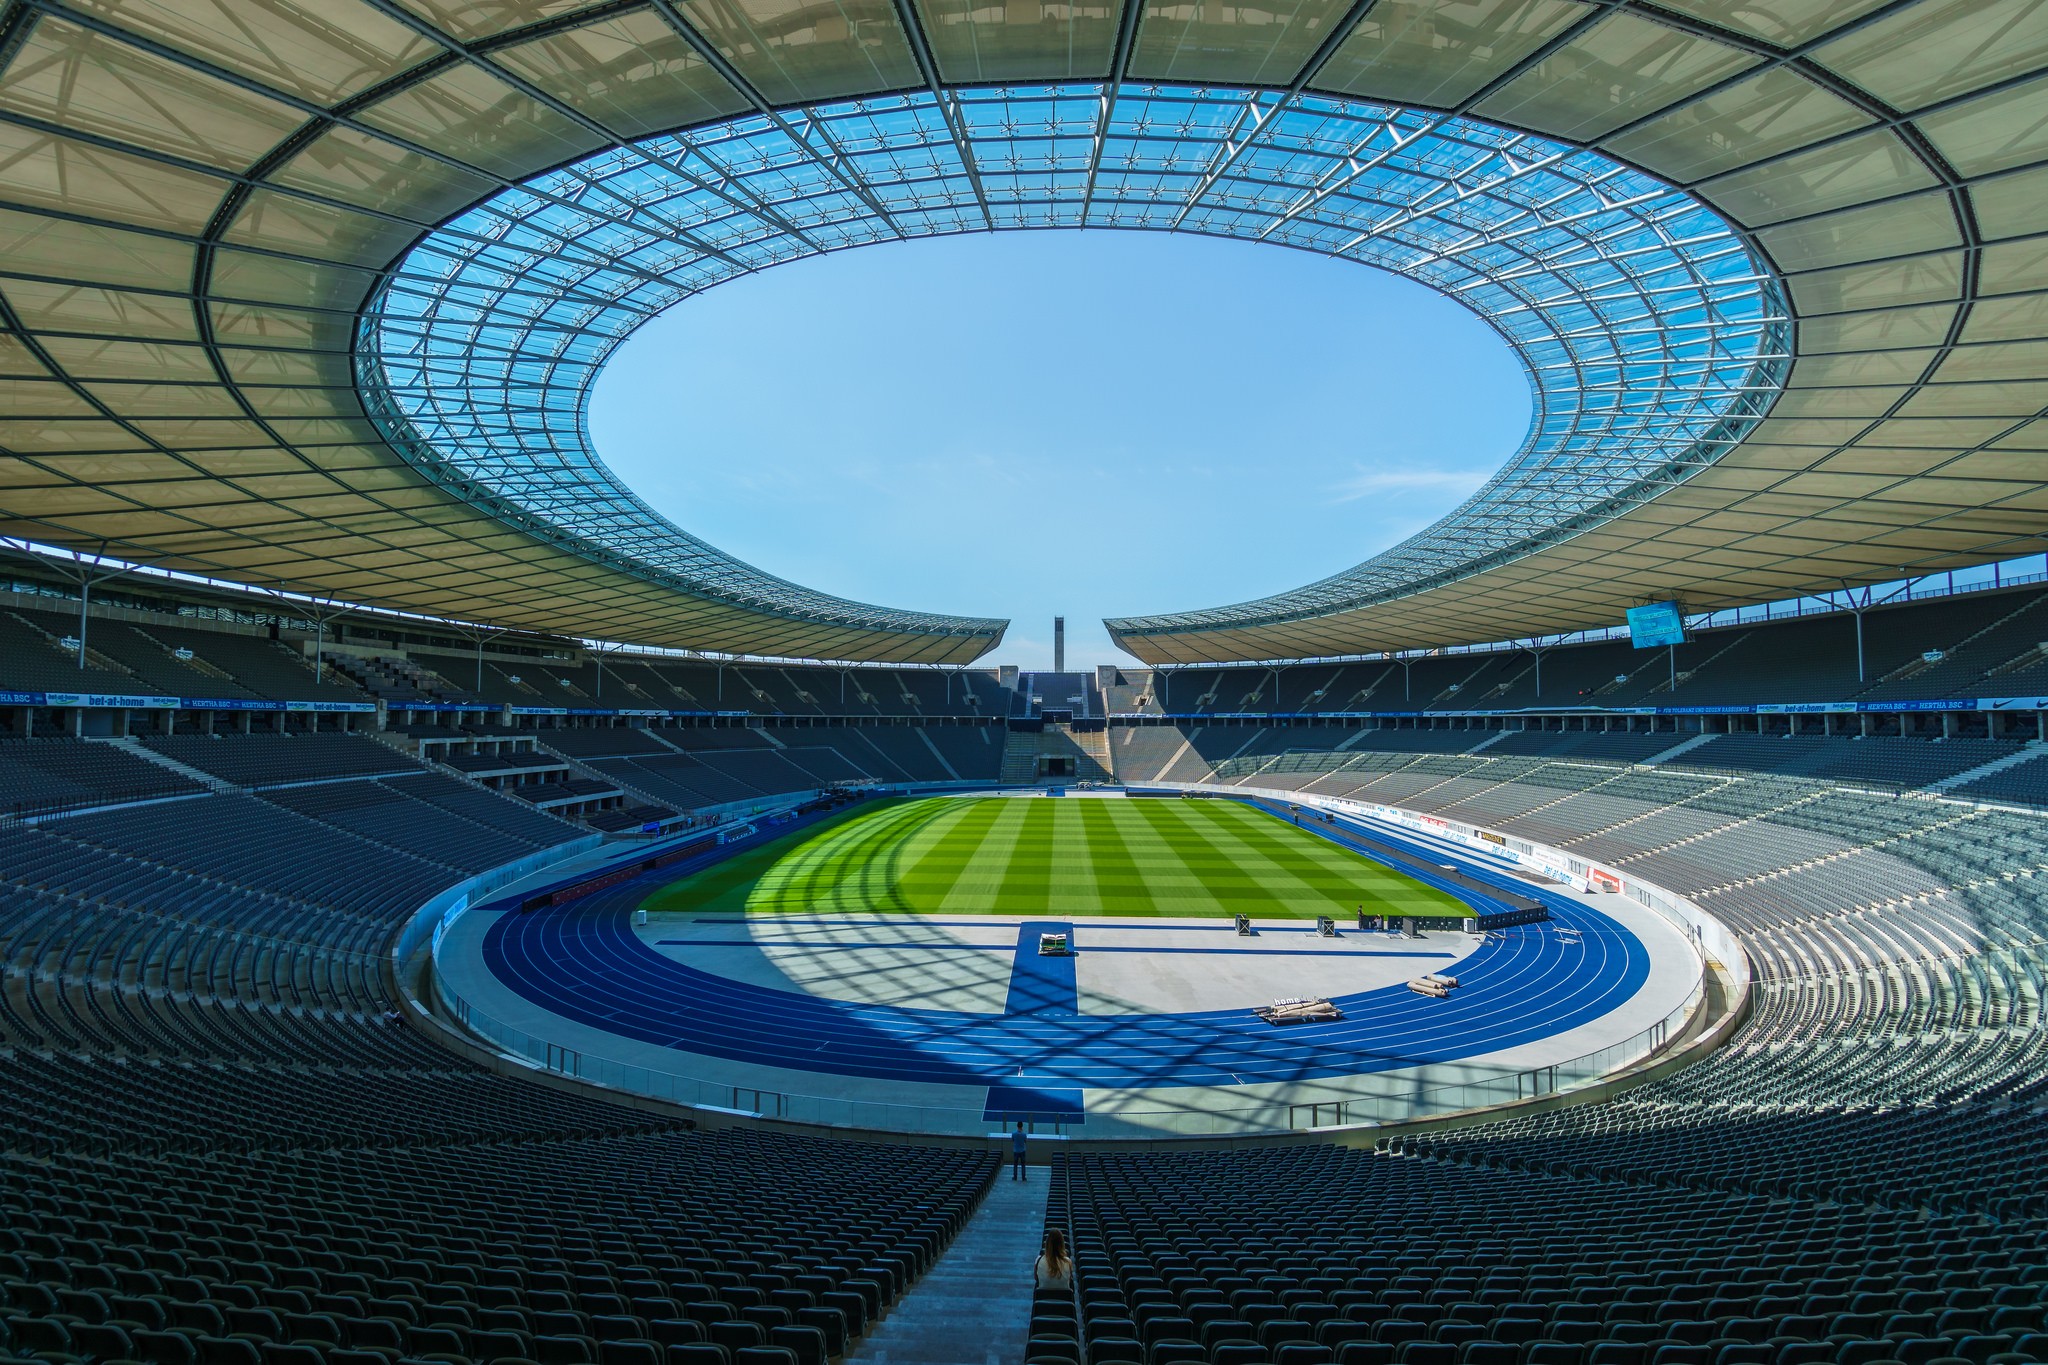 General 2048x1365 photography stadium Germany Berlin Olympiastadion soccer pitches